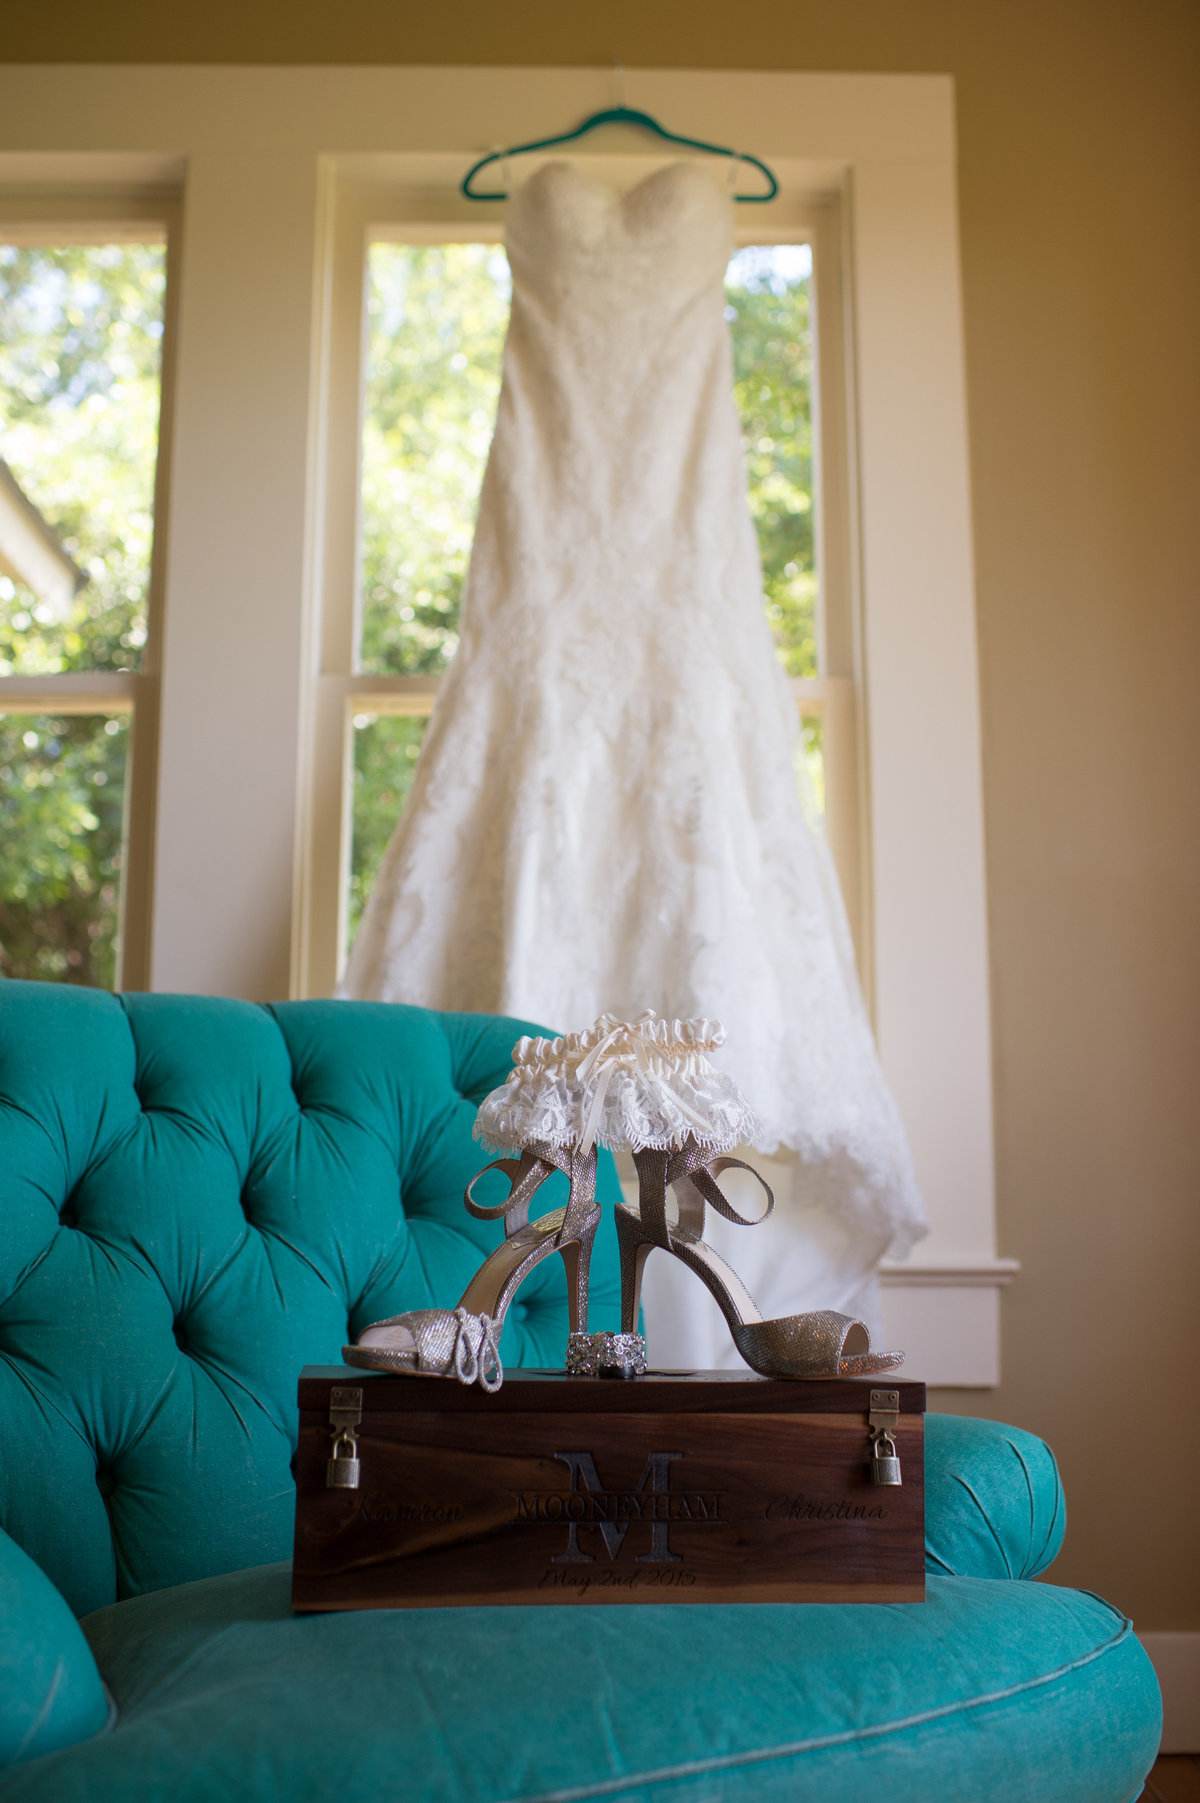 River Rock Event Center Texas  Brides accessories dress shoes and garter teal green chair